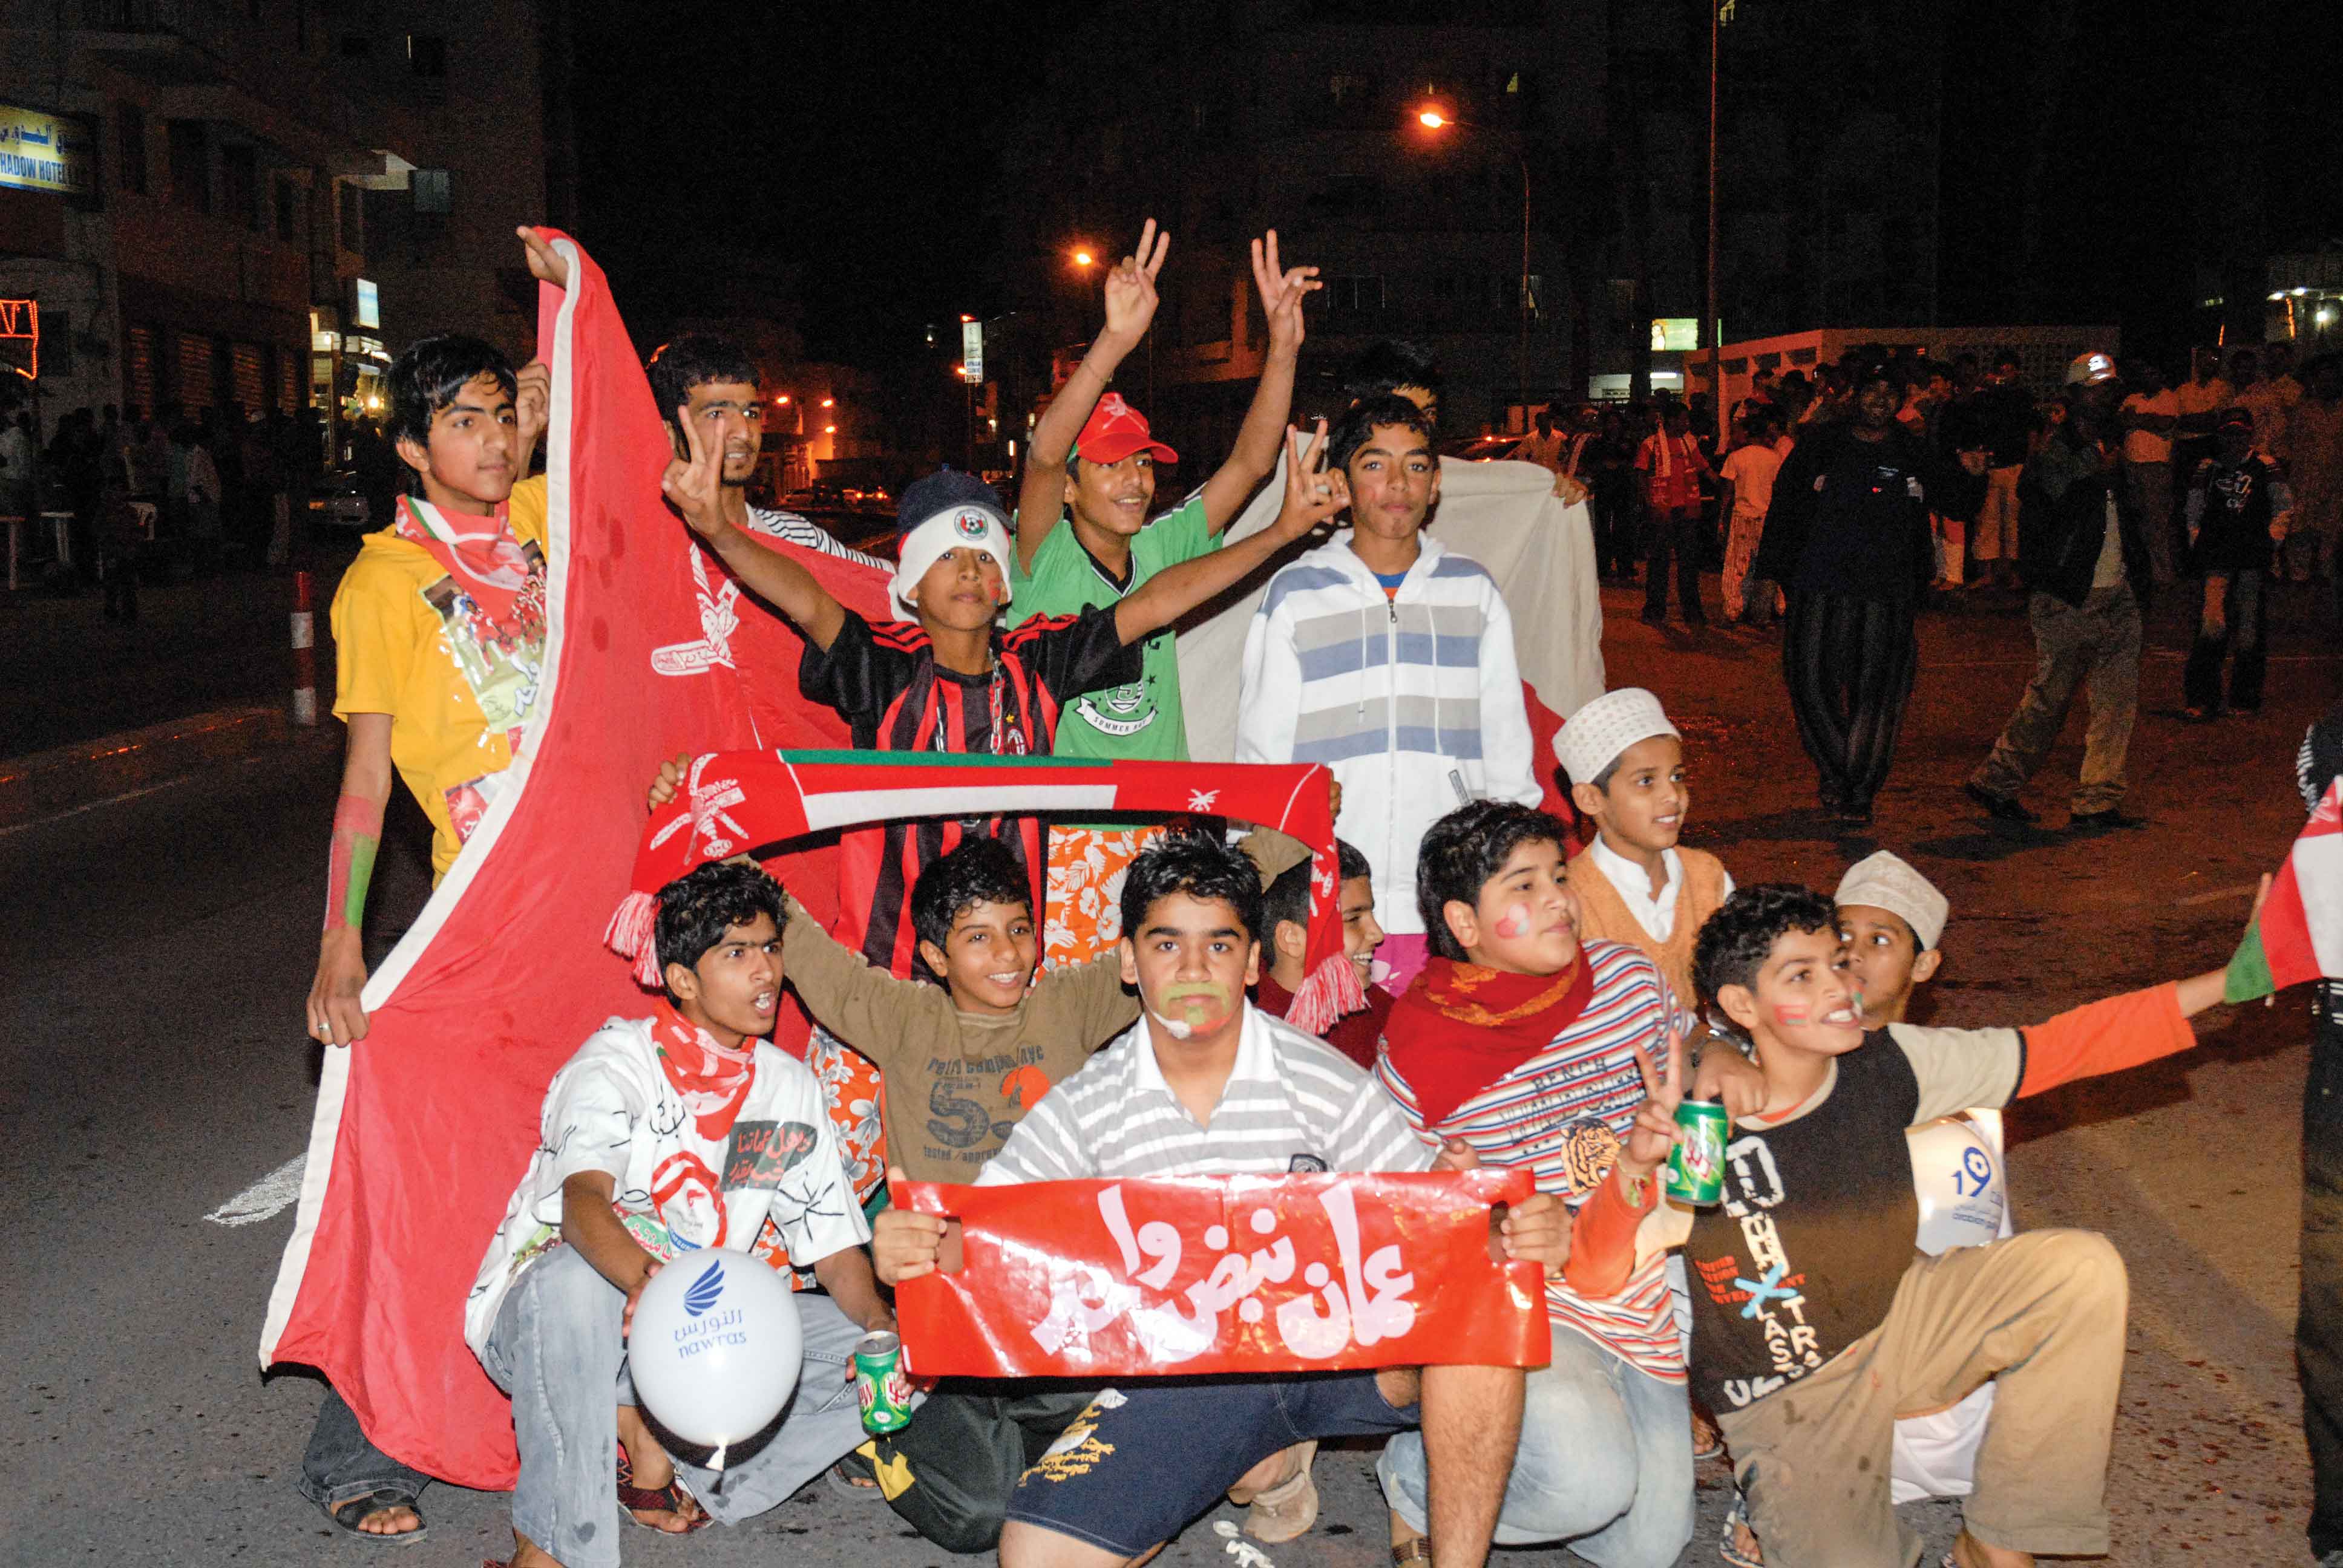 OmanPride: Residents unite to wish Oman football team ahead of Gulf Cup